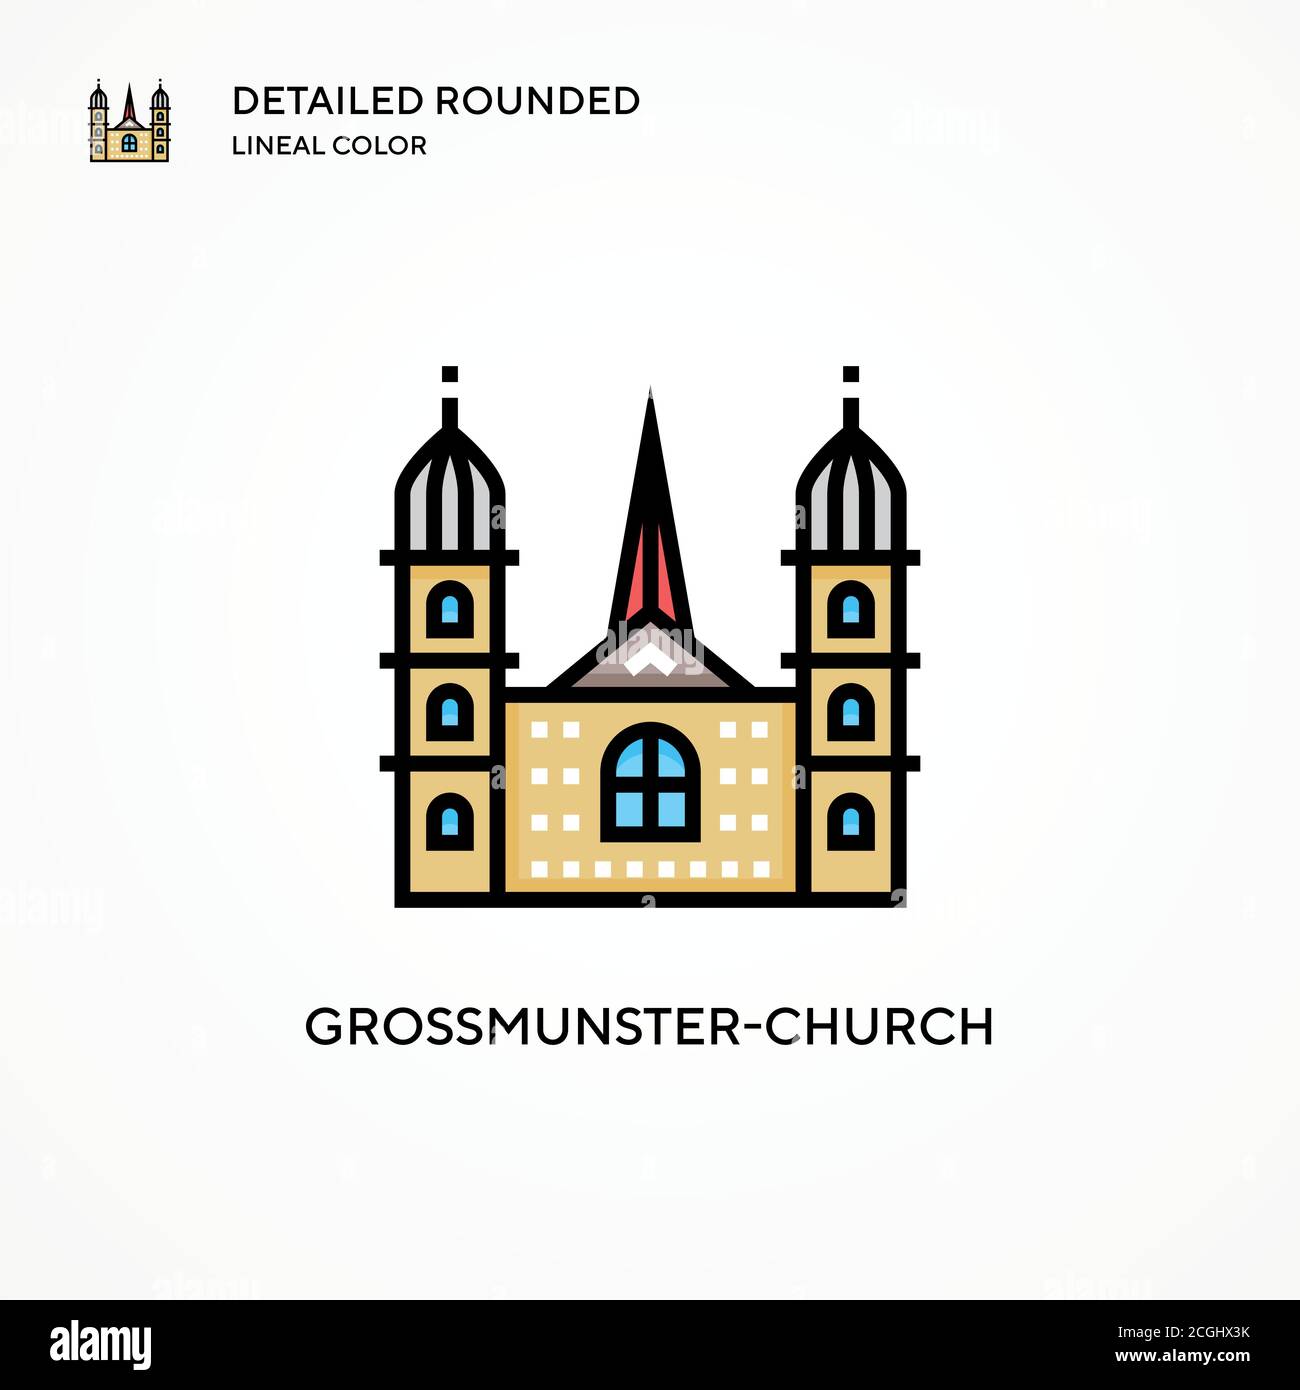 Grossmunster-church vector icon. Modern vector illustration concepts. Easy to edit and customize. Stock Vector